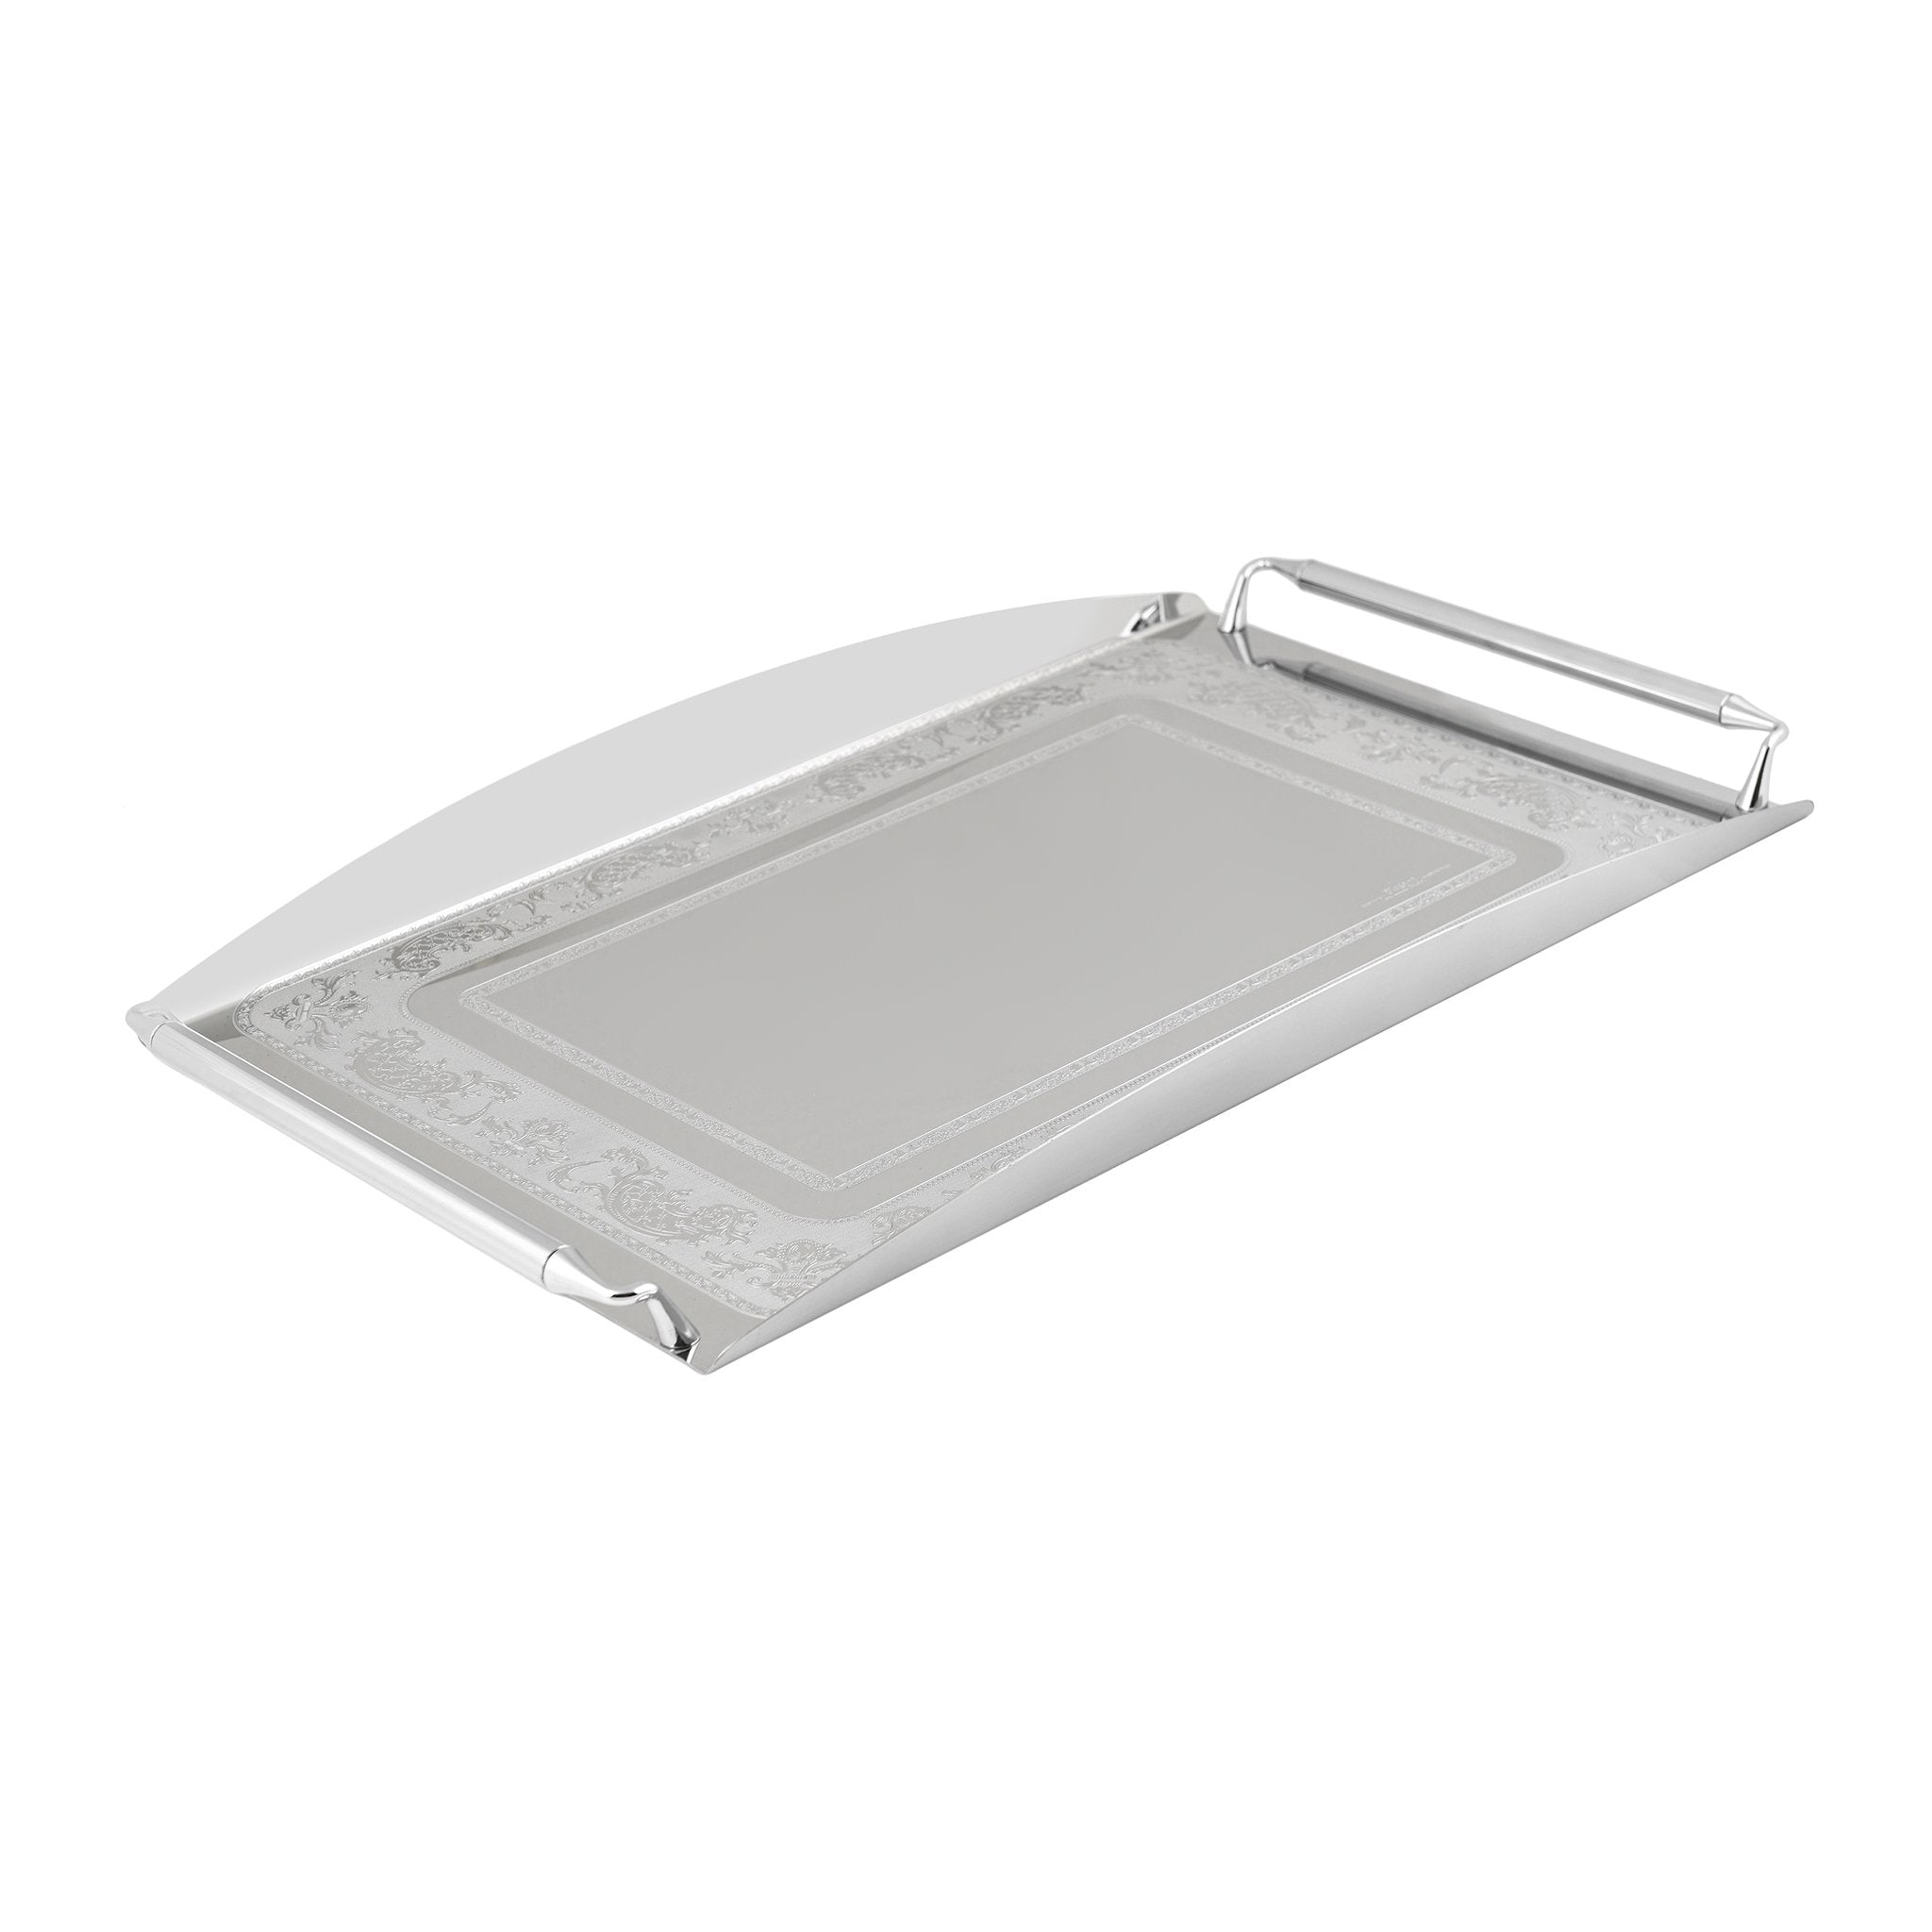 Elegant Gioiel - Rectangular Tray with Handles - Stainless Steel 18/10 - 55x38cm - 75000169